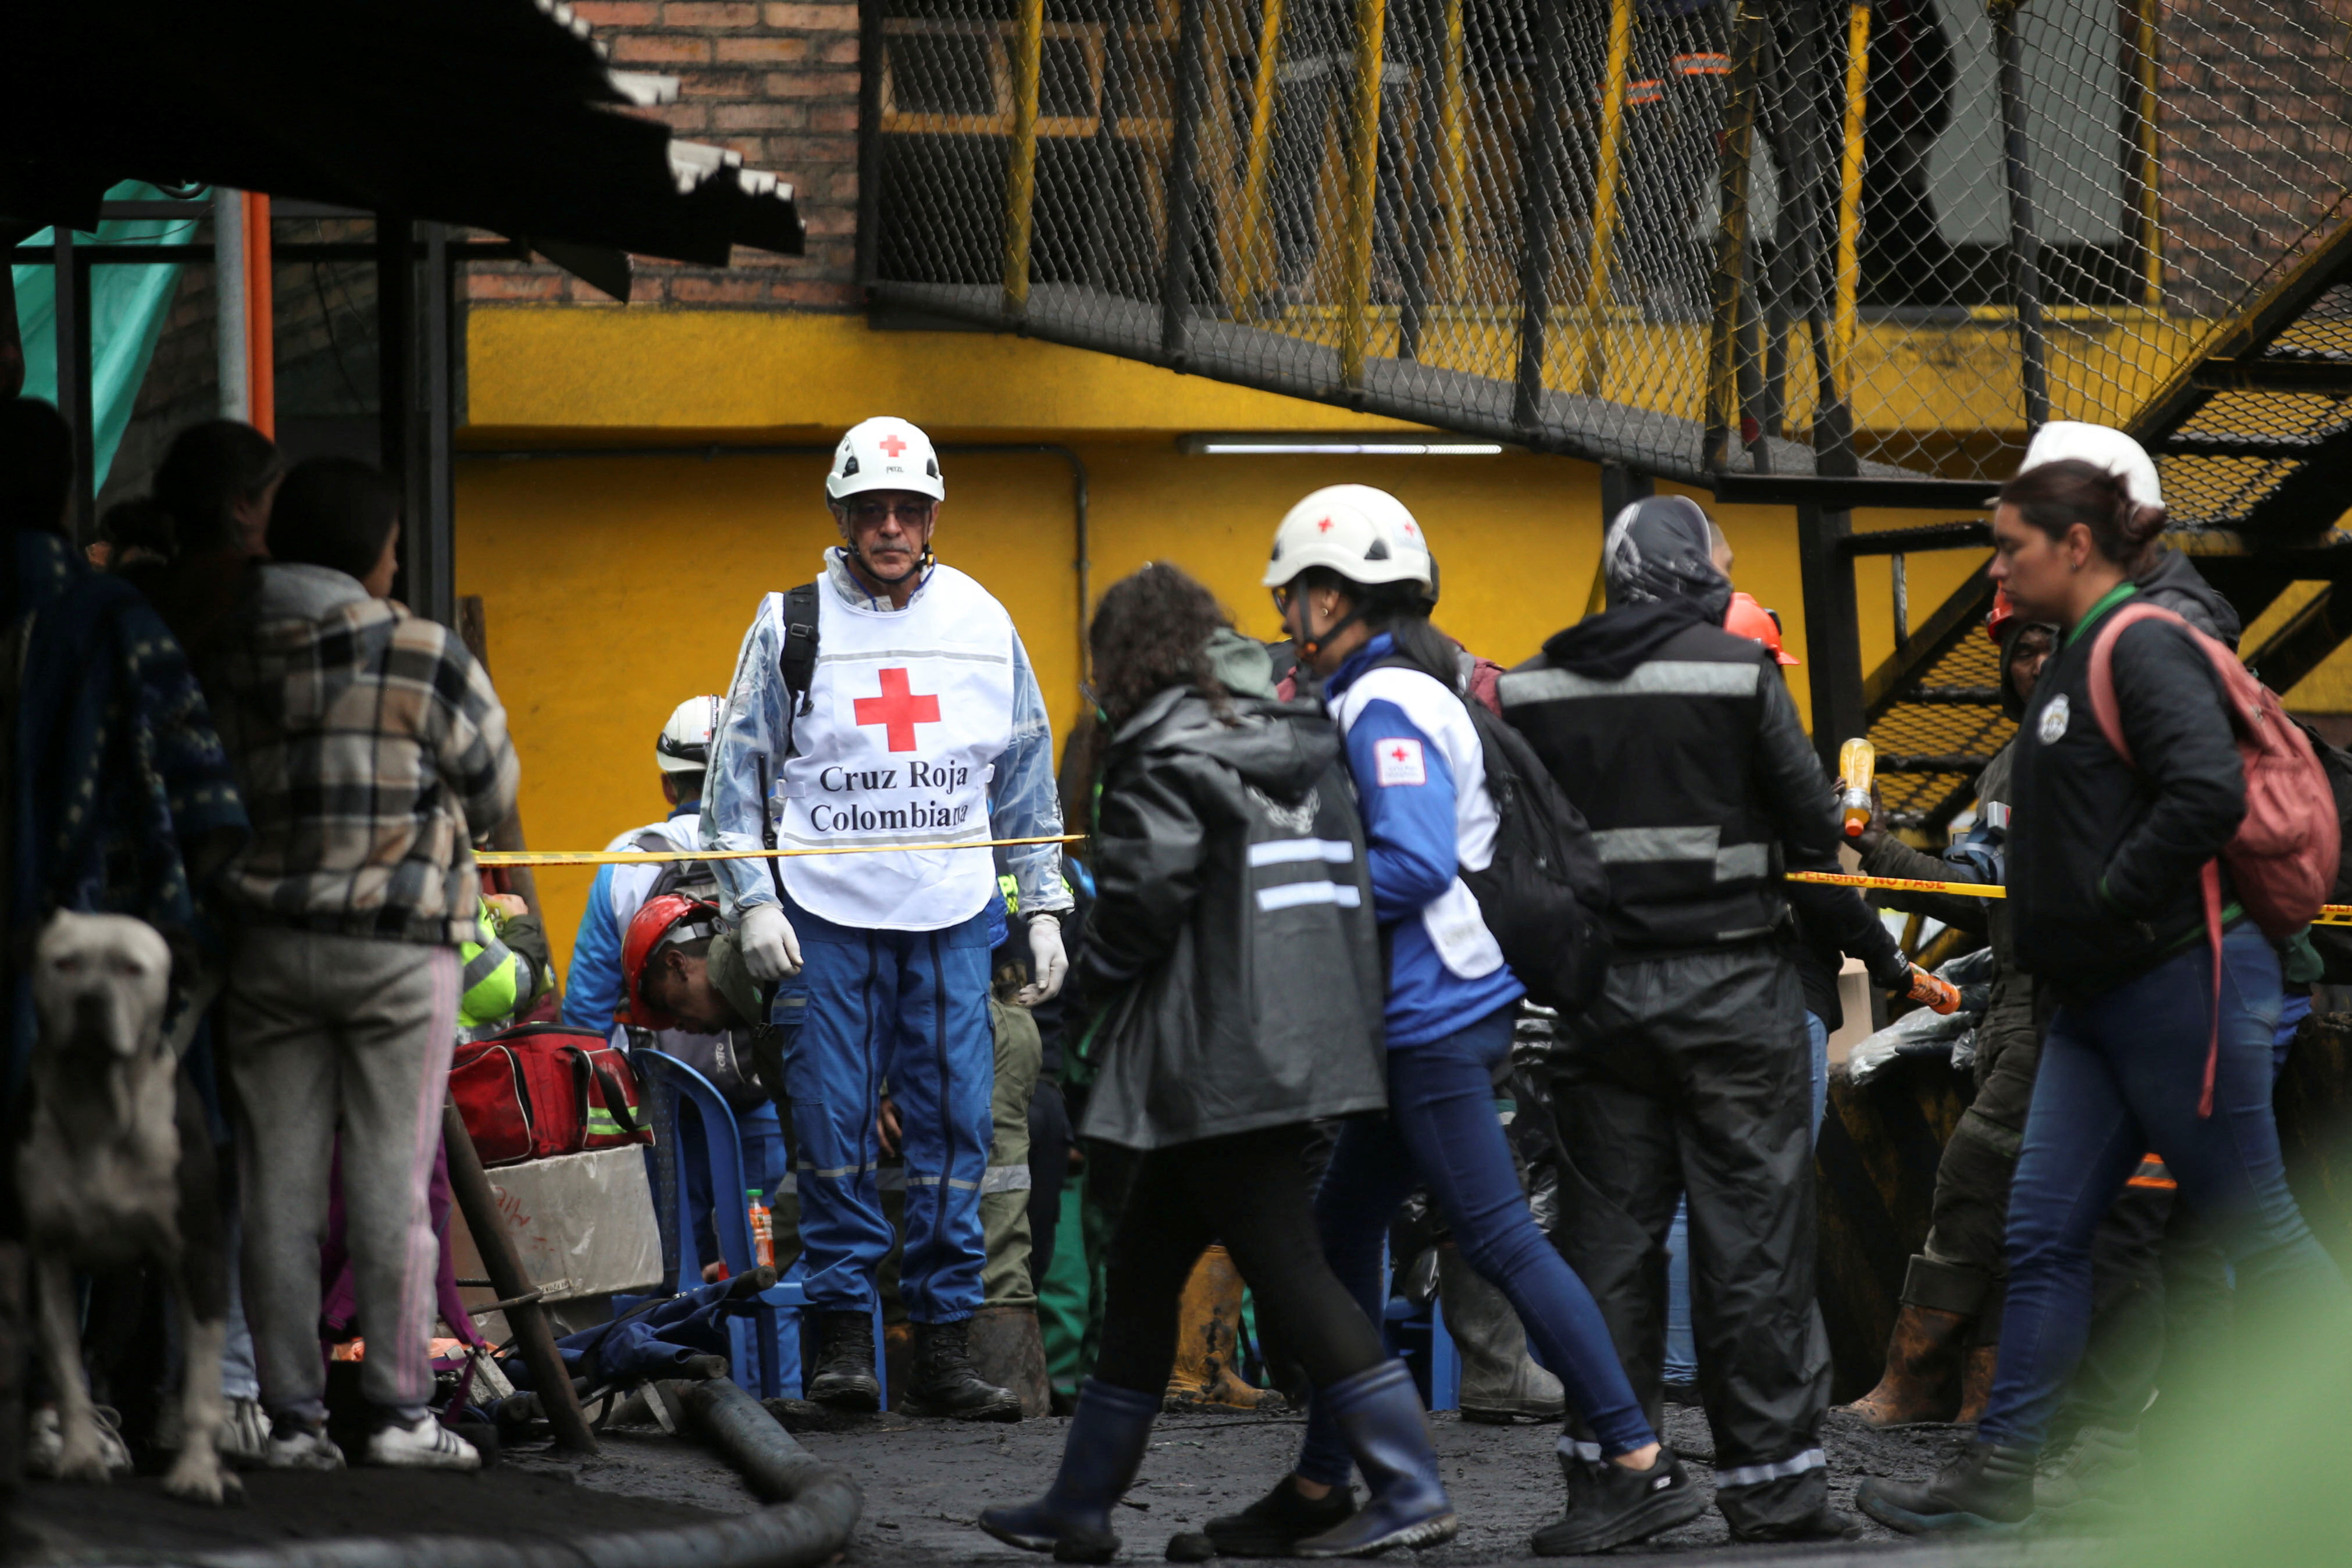 People wait during the search and rescue work of miners trapped following the explosion of a mine in Sutatausa